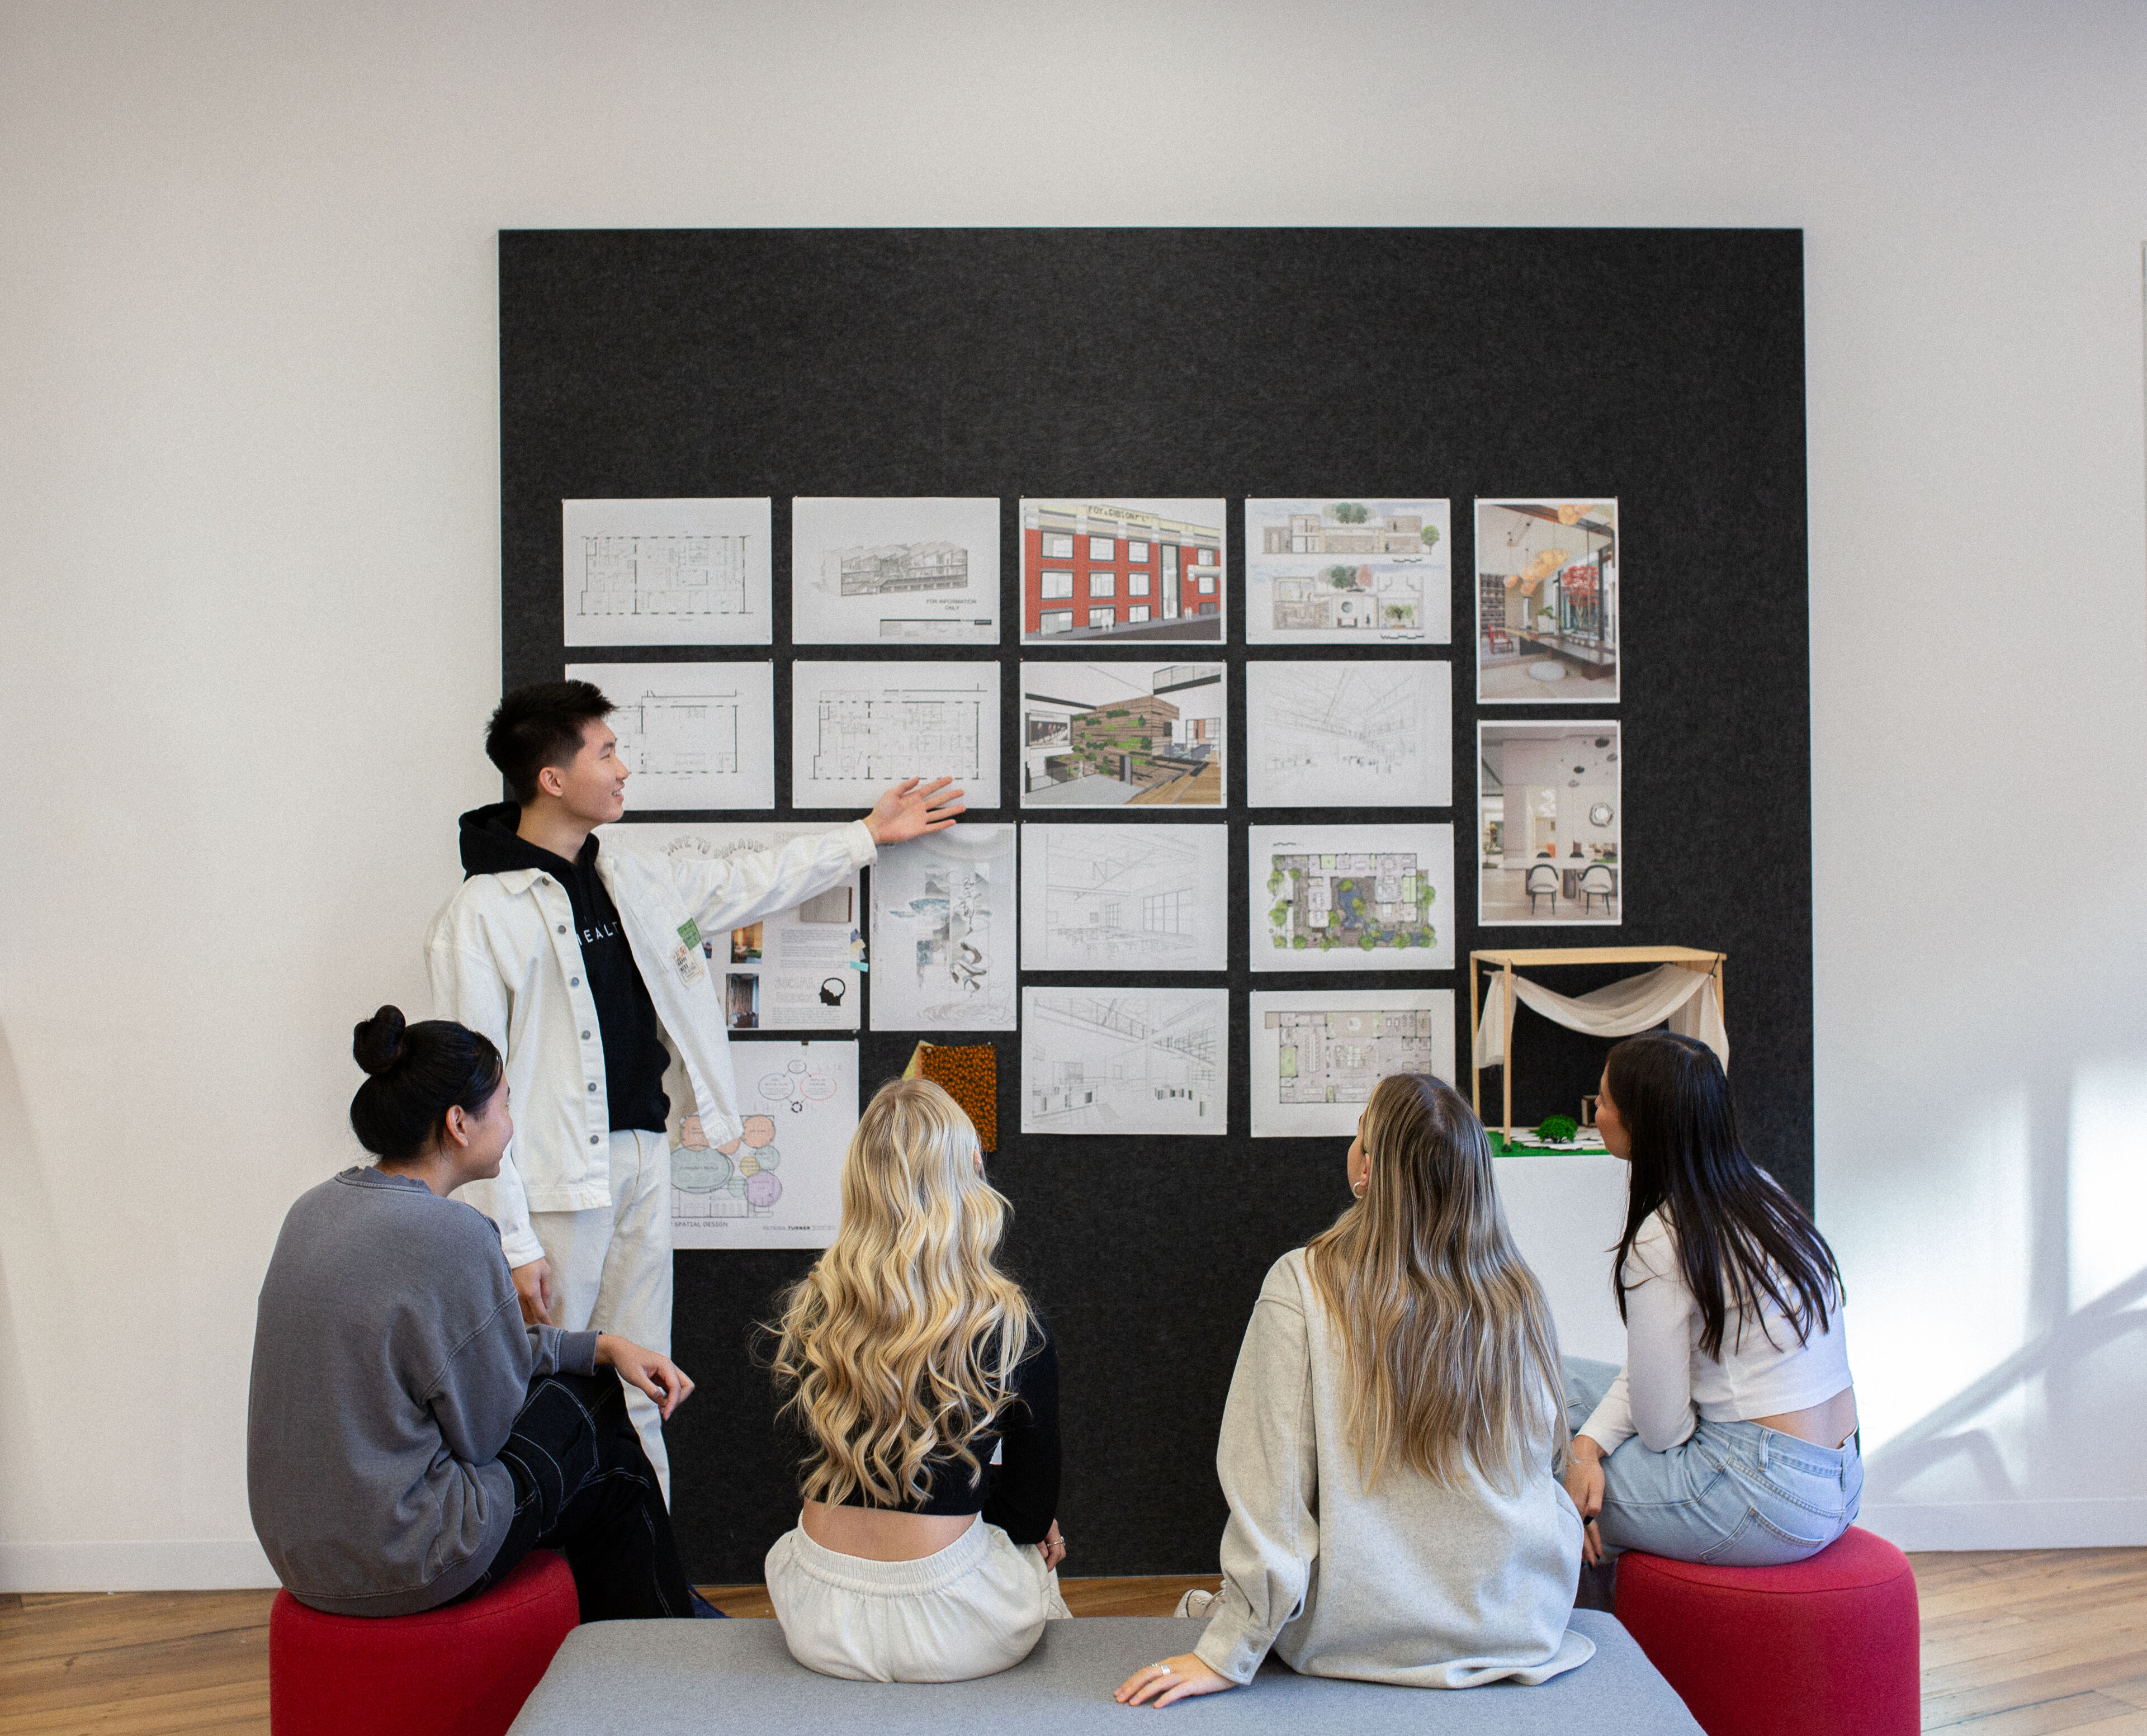 A student presenting interior design to a group of attentive peers in a modern classroom.